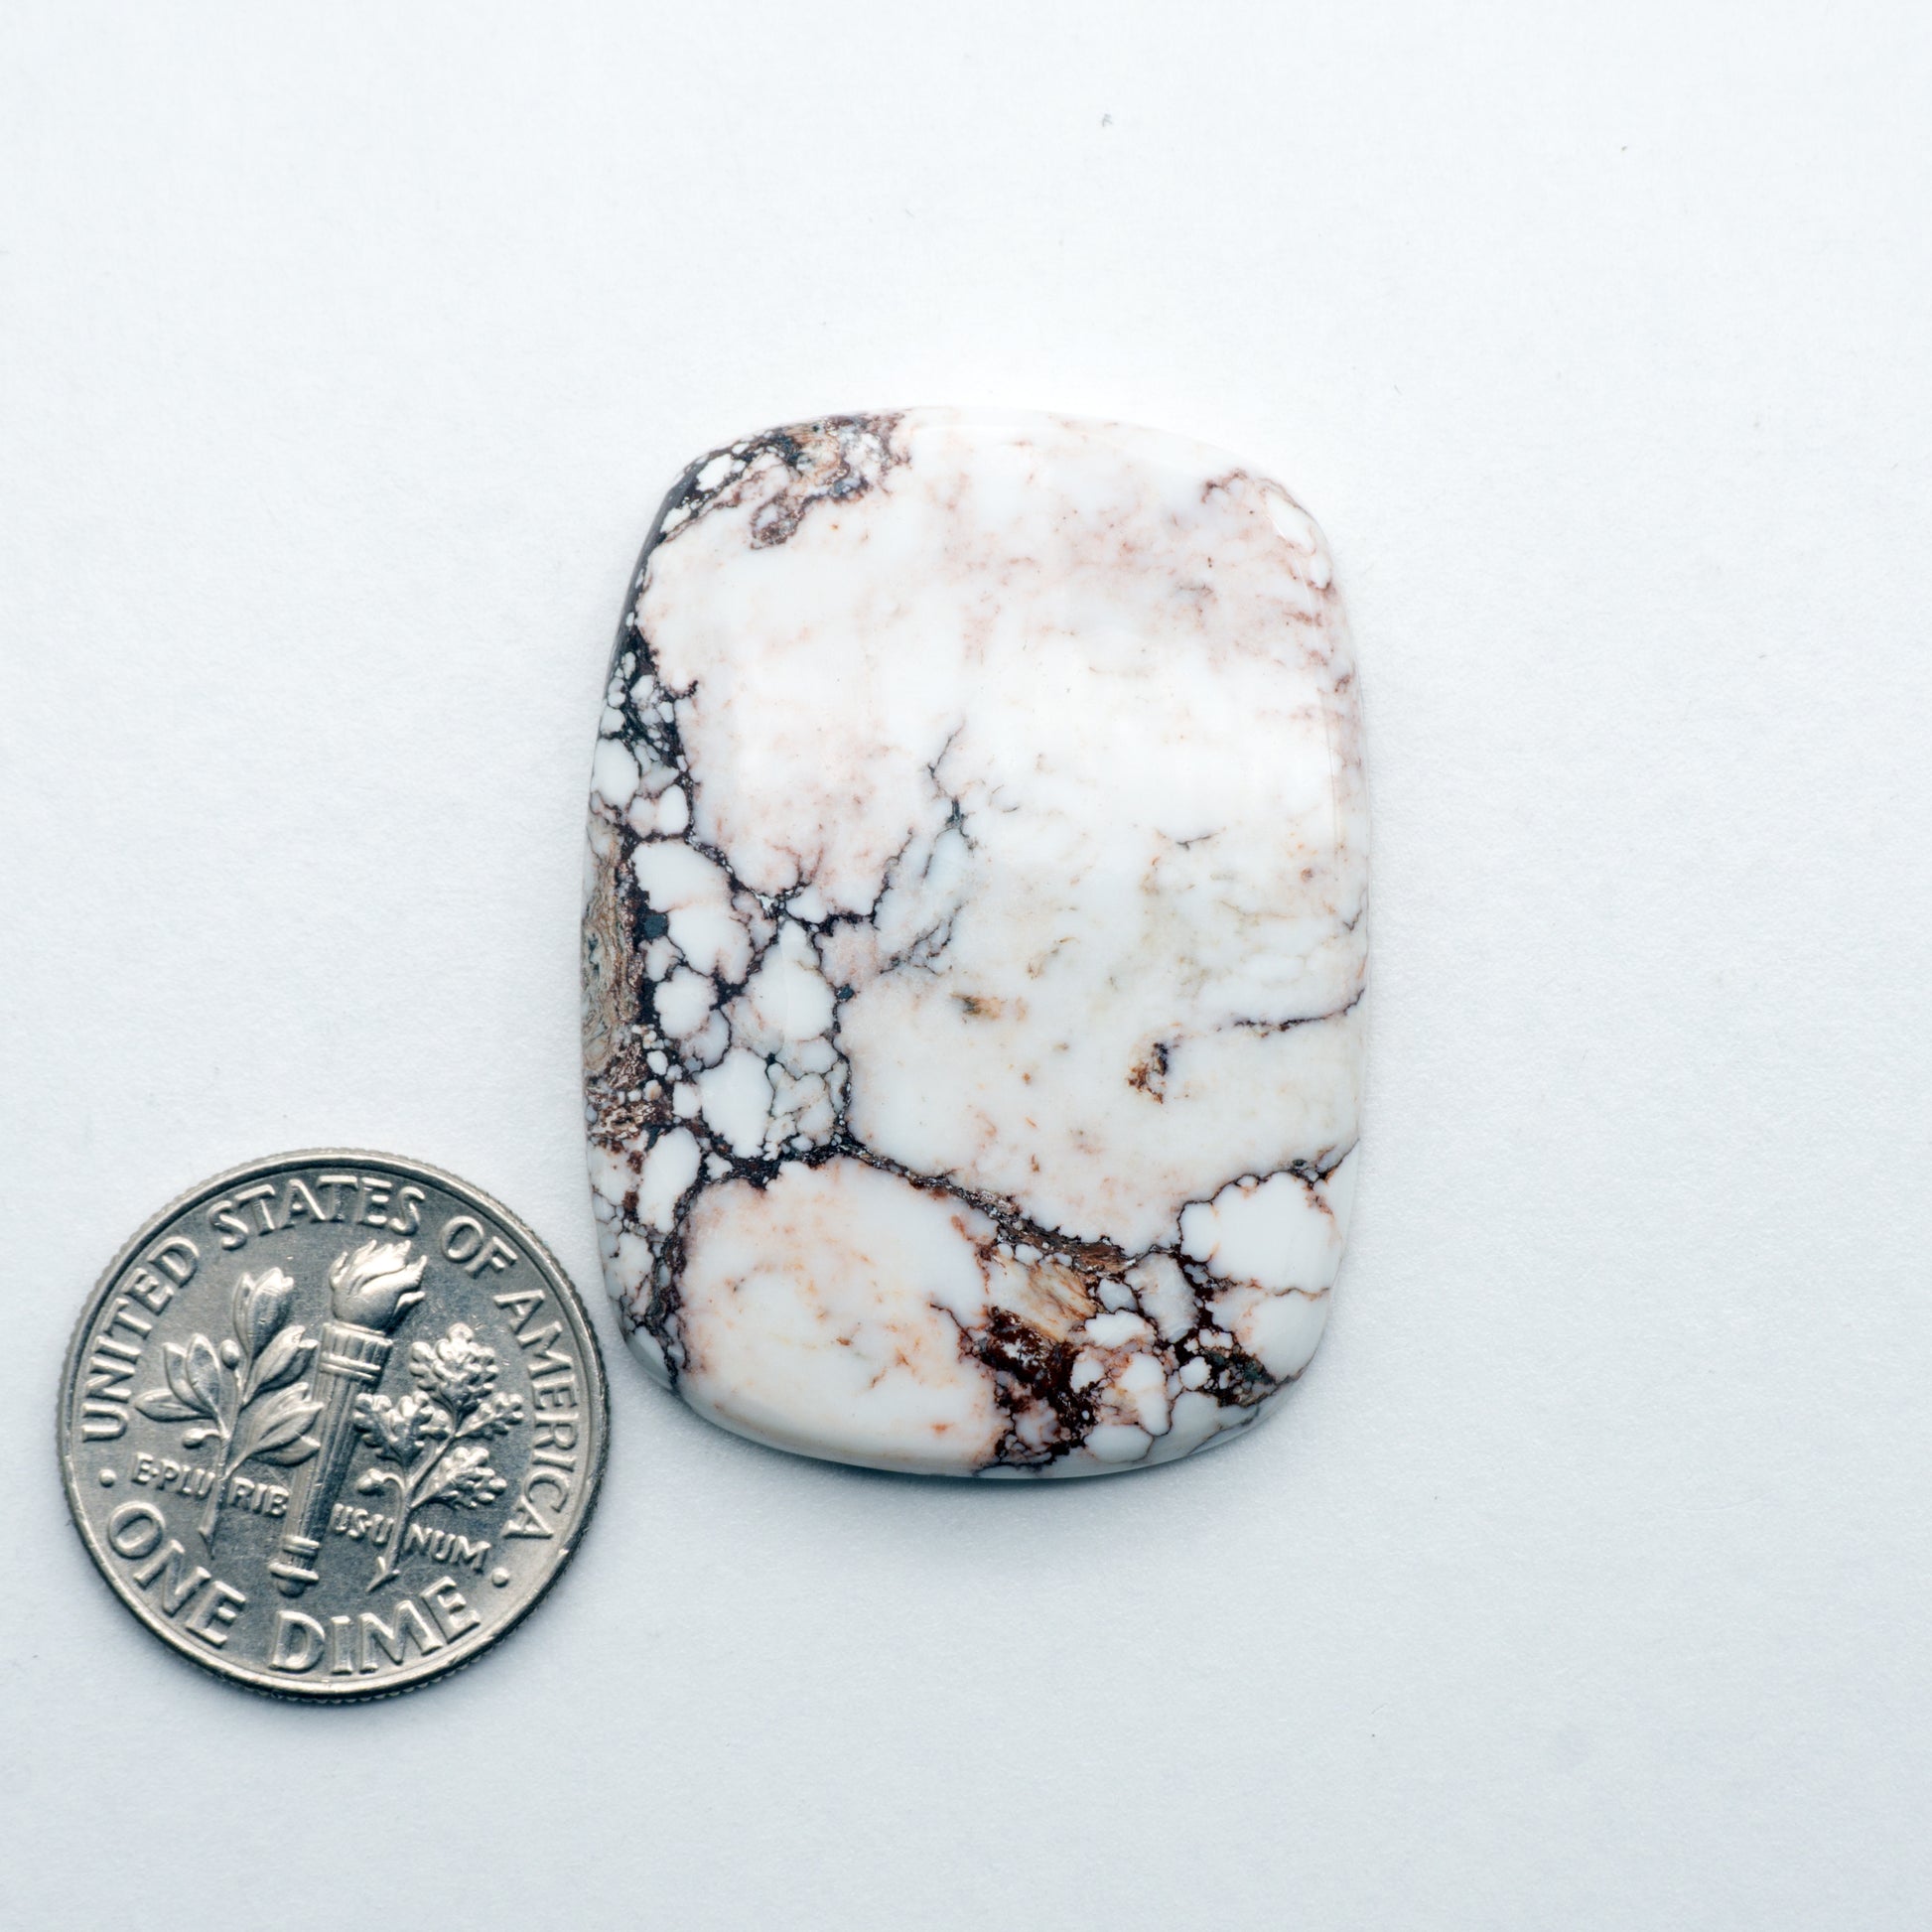 This Natural Wild Horse Cabochon has a glossy finish and is unbacked. This Magnesite stone is mined in Arizona, USA and is similar to turquoise used for jewelry making.